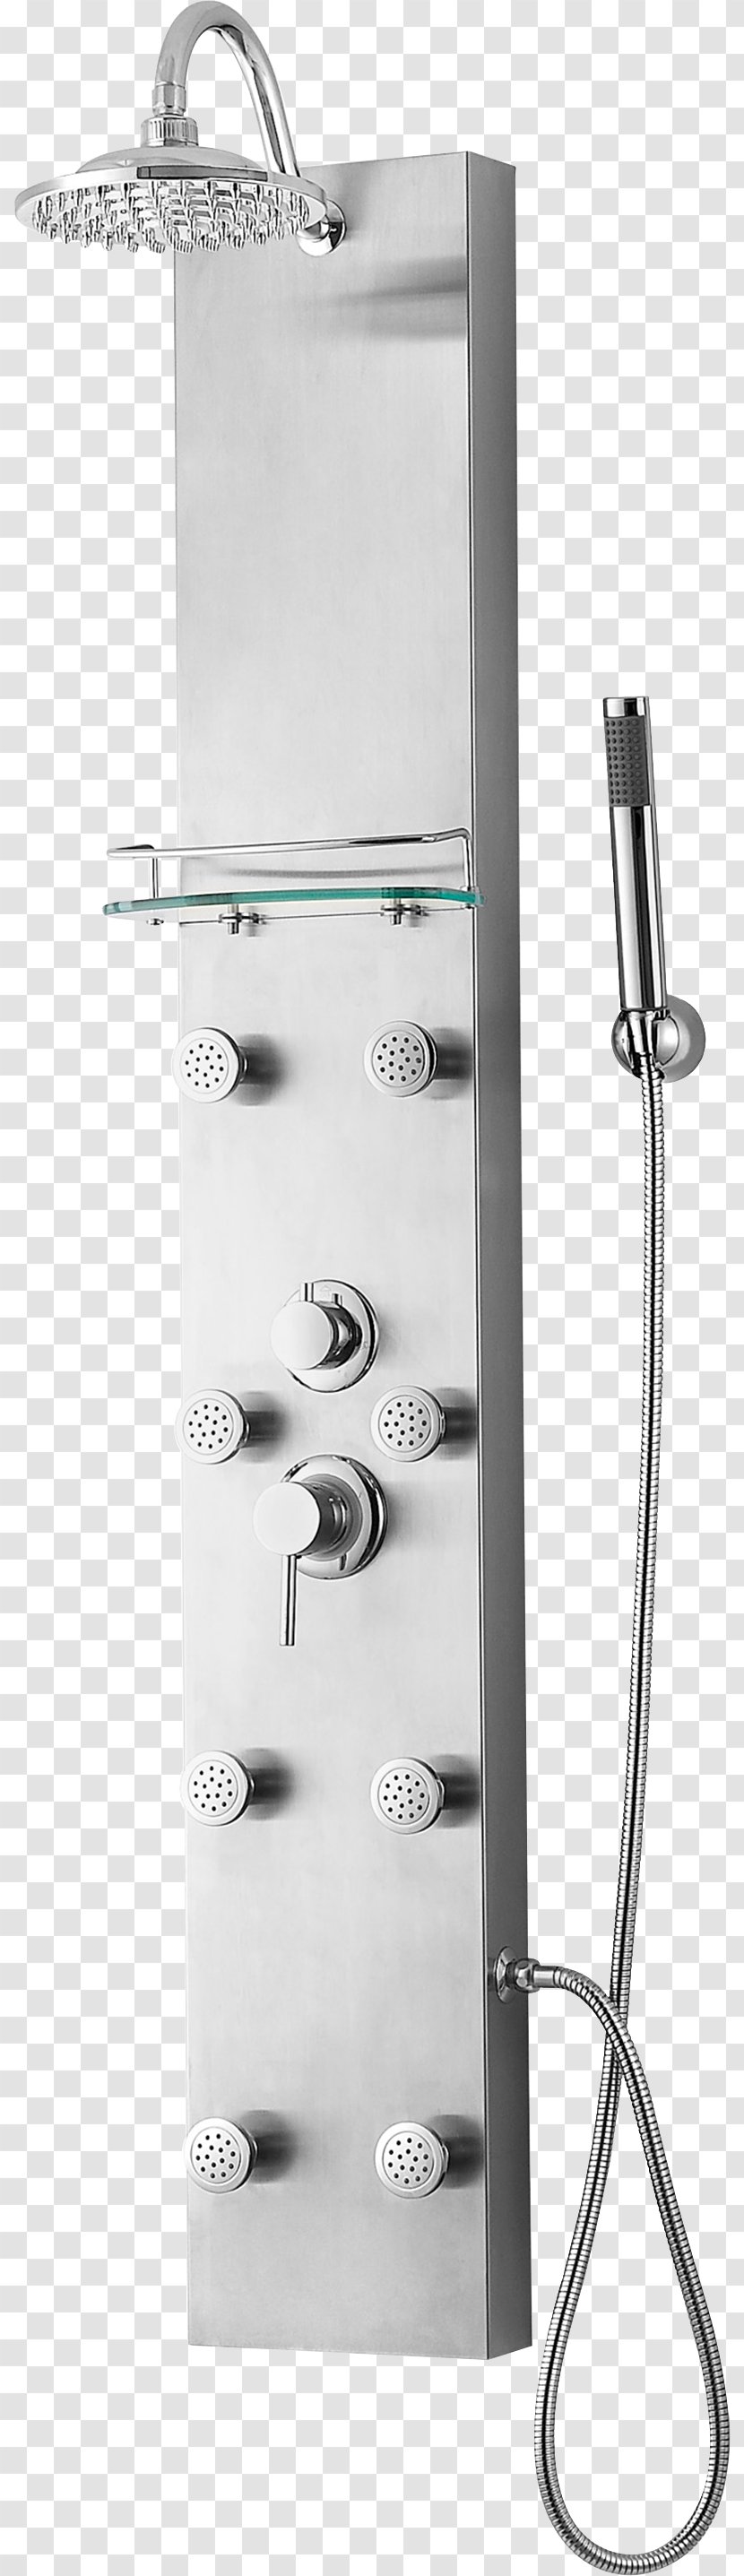 Faucet Handles & Controls Shower Thermostatic Mixing Valve Stainless Steel Spray - Bathroom Accessory - Wall Shelves Transparent PNG